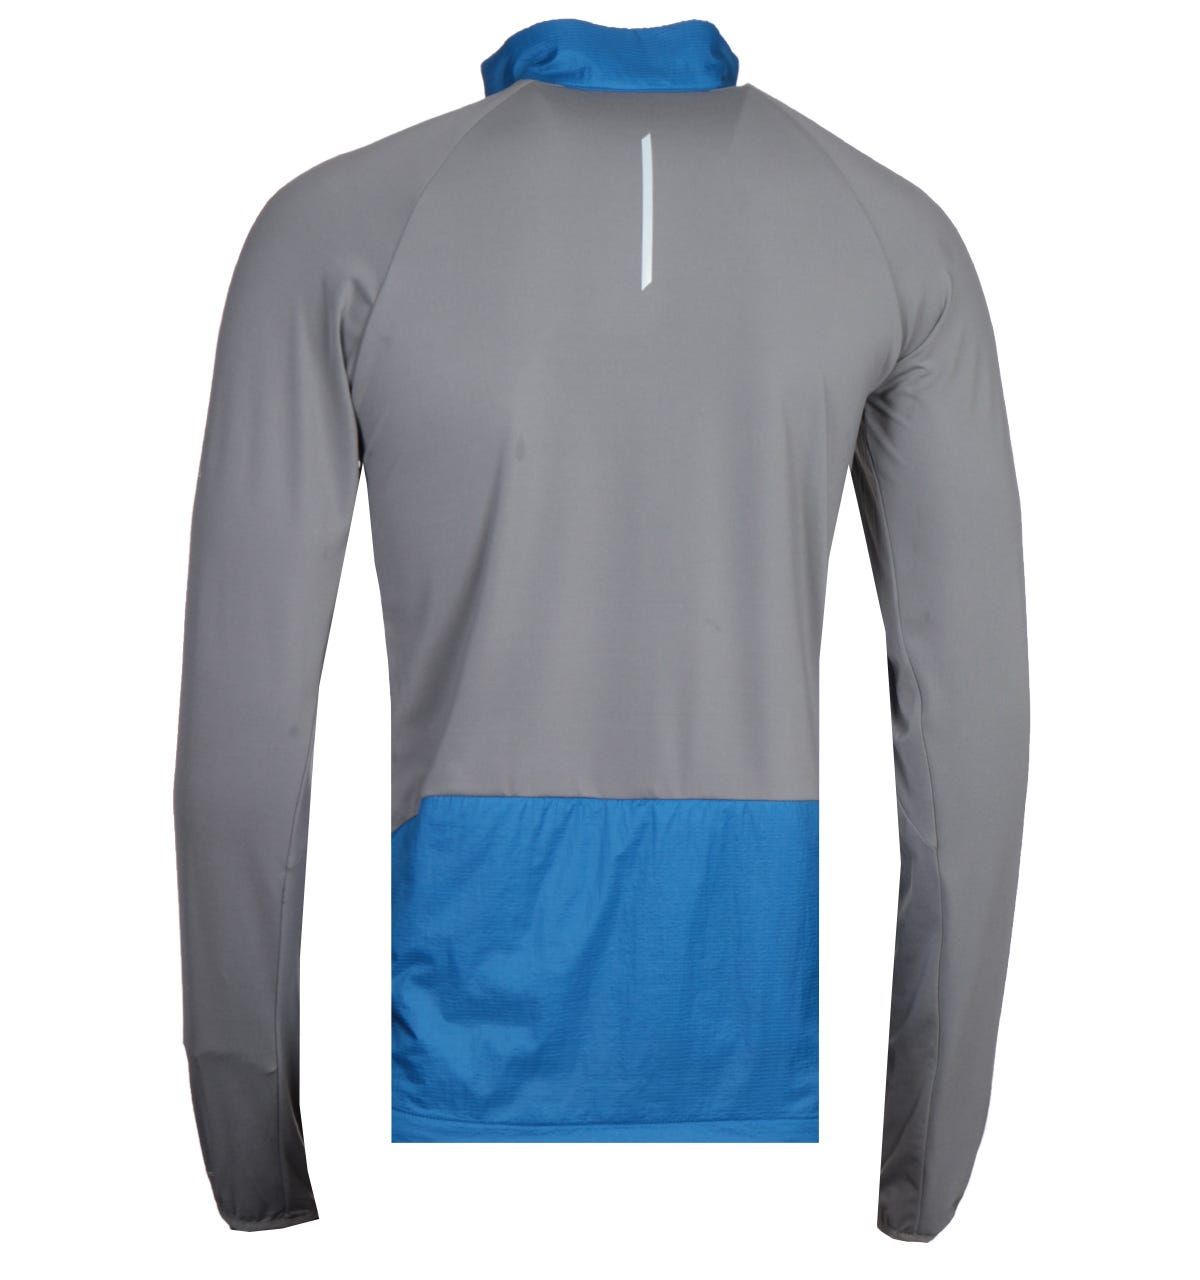 <p>A Columbia essential perfect for this seasons wardrobe. The Columbia Blue Caldorado Insulated Jacket is a lightweight polyester composition, fitted with a full zip fastening with side-entry pockets either side. The design is finished with the Columbia logo embroidered on the chest.</p><ul><li>Polyester composition</li><li>Zip fastening</li><li>Tonal stitching throughout</li><li>Columbia logo located on chest</li></ul><p>Style & Fit:</p><ul><li>Regular fit</li><li>Fits true to size</li></ul><p>Fabric Composition & Care:</p><ul><li>100% Polyester</li><li>Machine wash</li></ul>